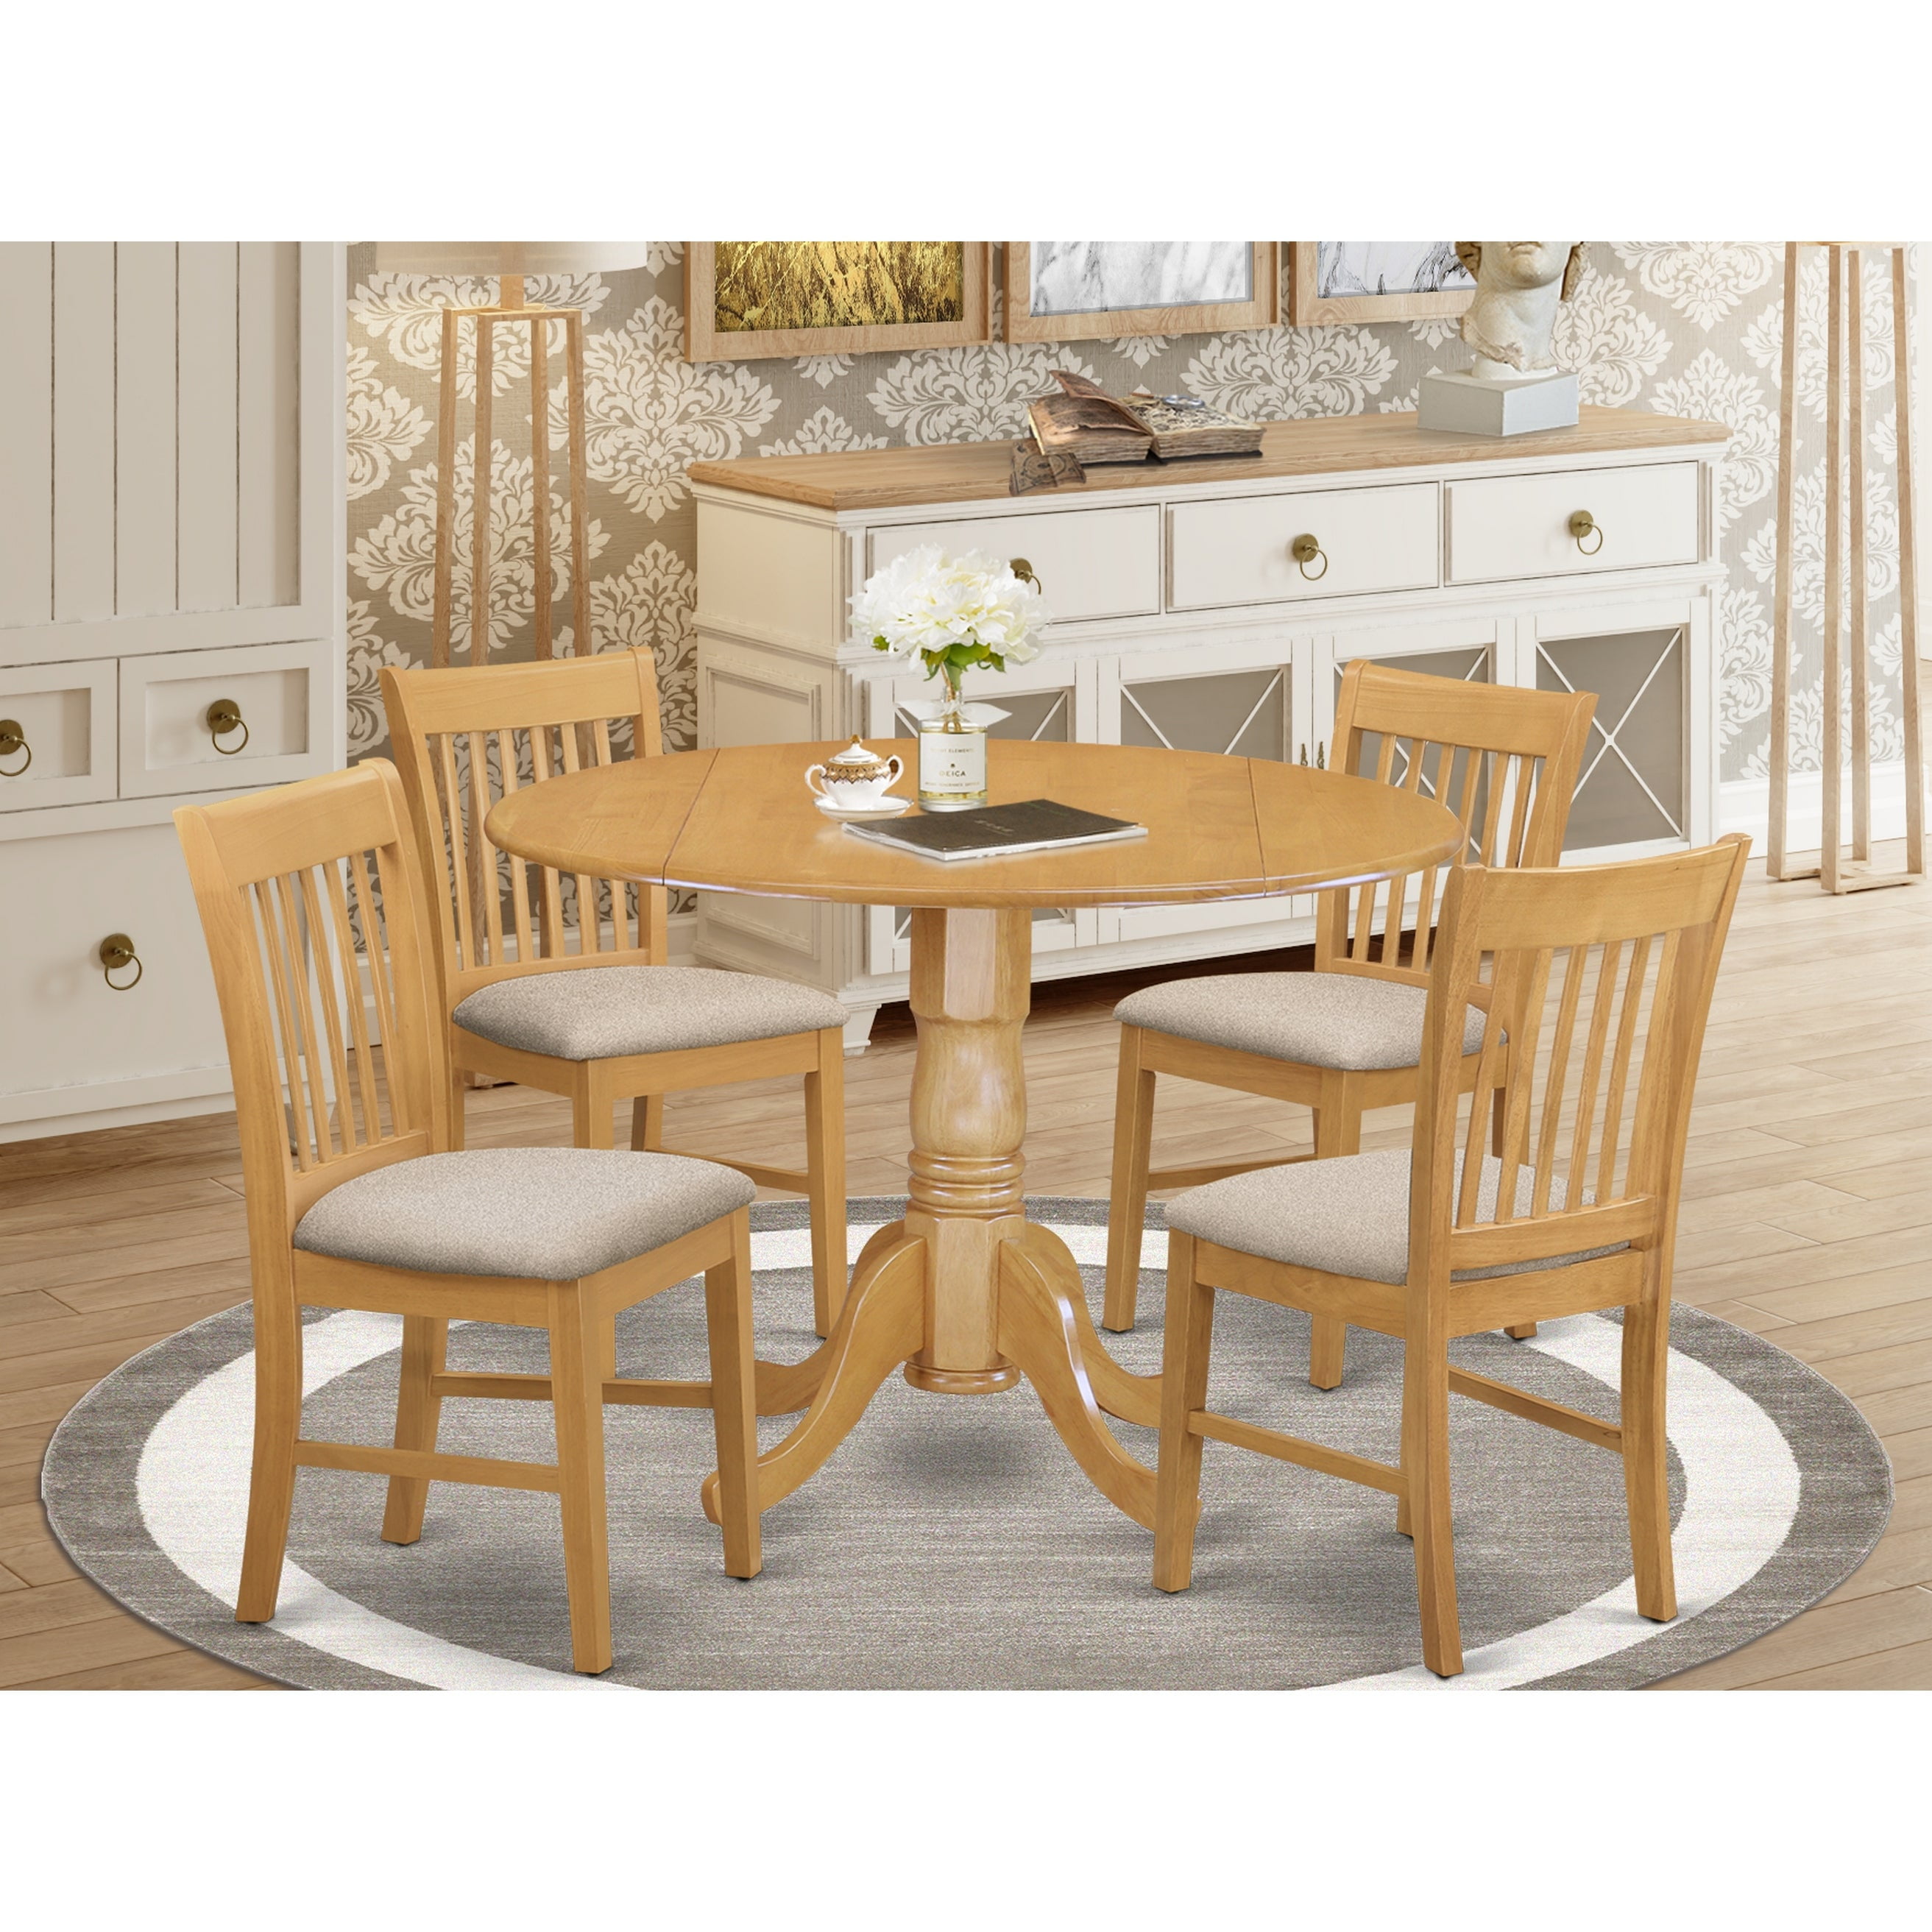 DLNO5OAKC 5 Pc small Kitchen Table setround Kitchen Table and 4